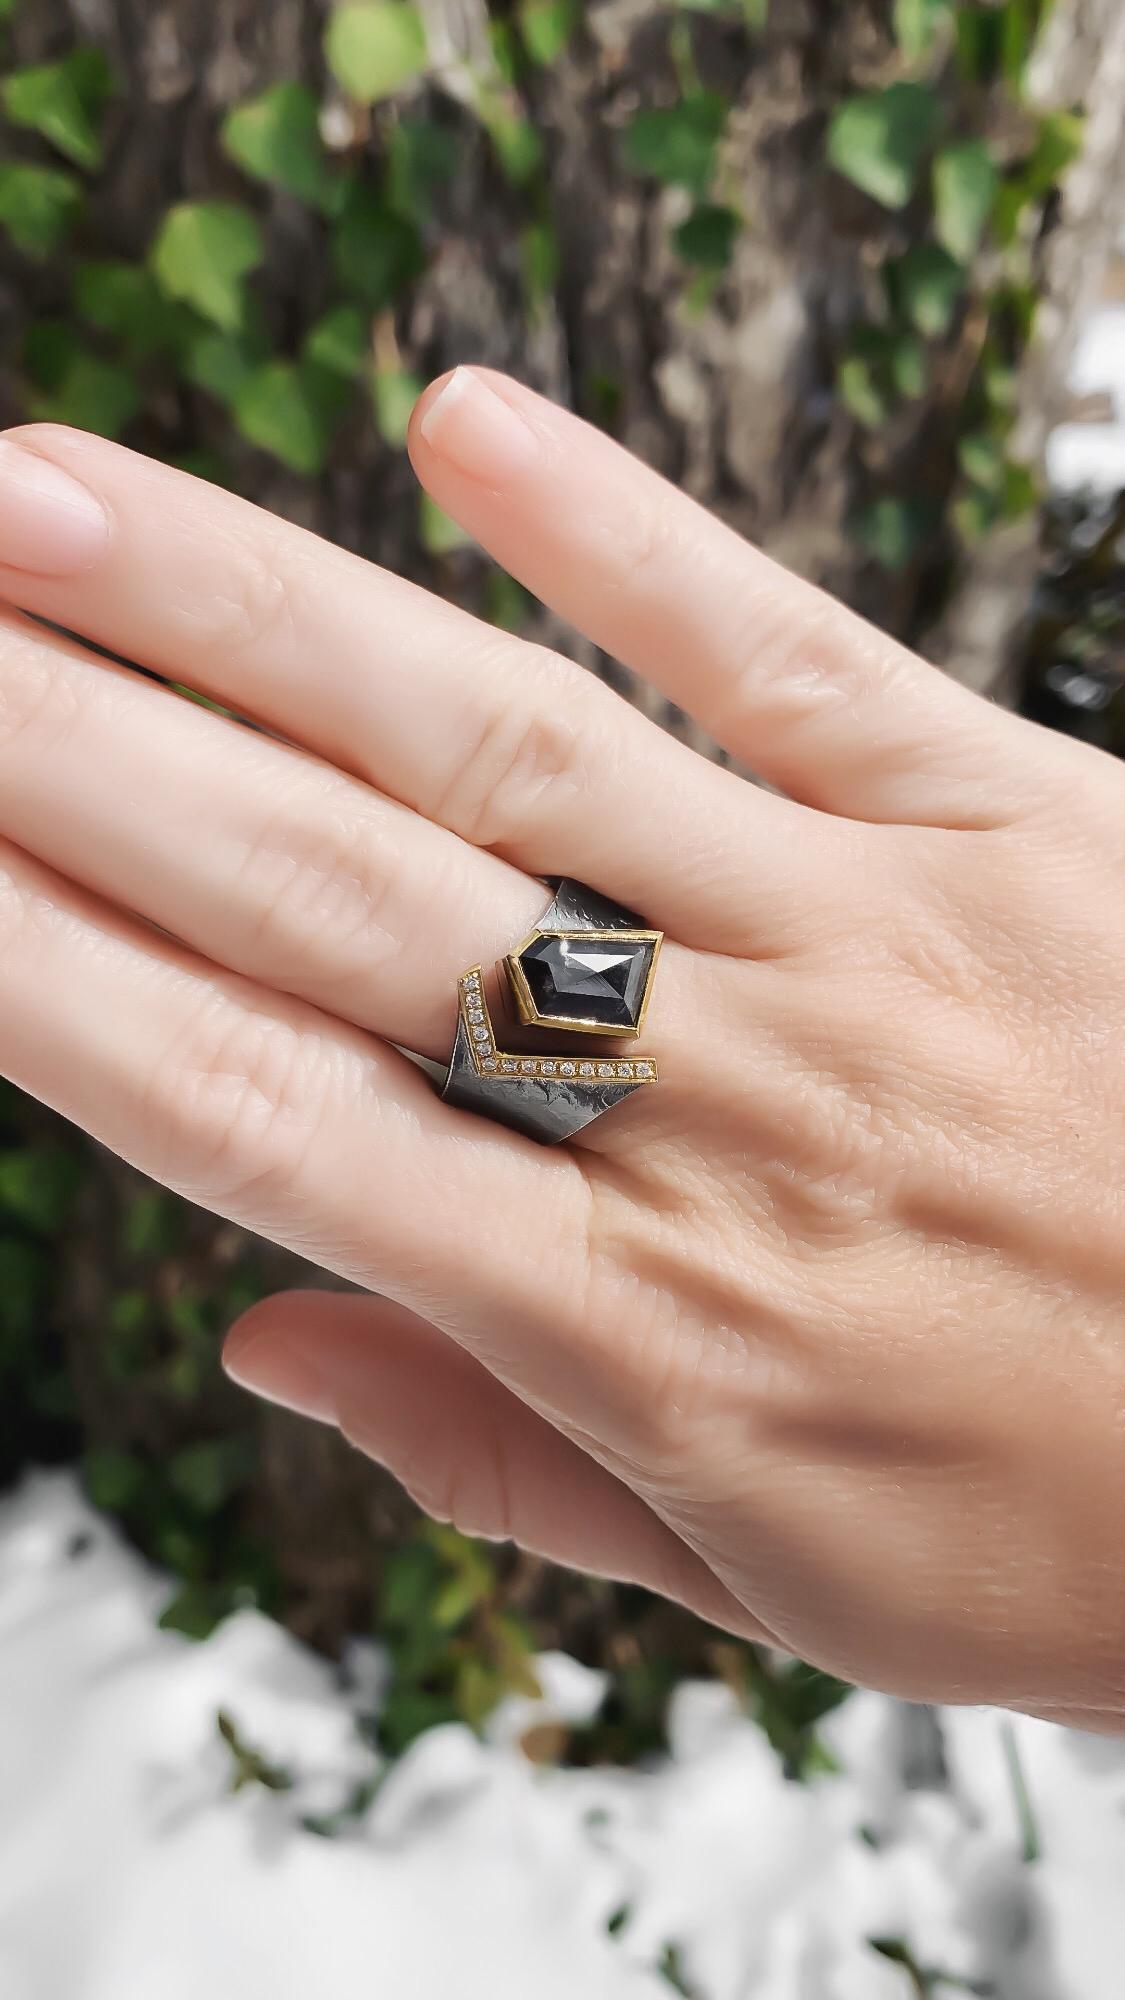 One of a Kind Cyclone Ring handmade by jewelry artist Elizabeth Garvin featuring a spectacular natural 1.23 carat rose-cut black diamond shield and 0.097 total carats of round brilliant-cut white diamonds, all set in 18k yellow gold and seamlessly